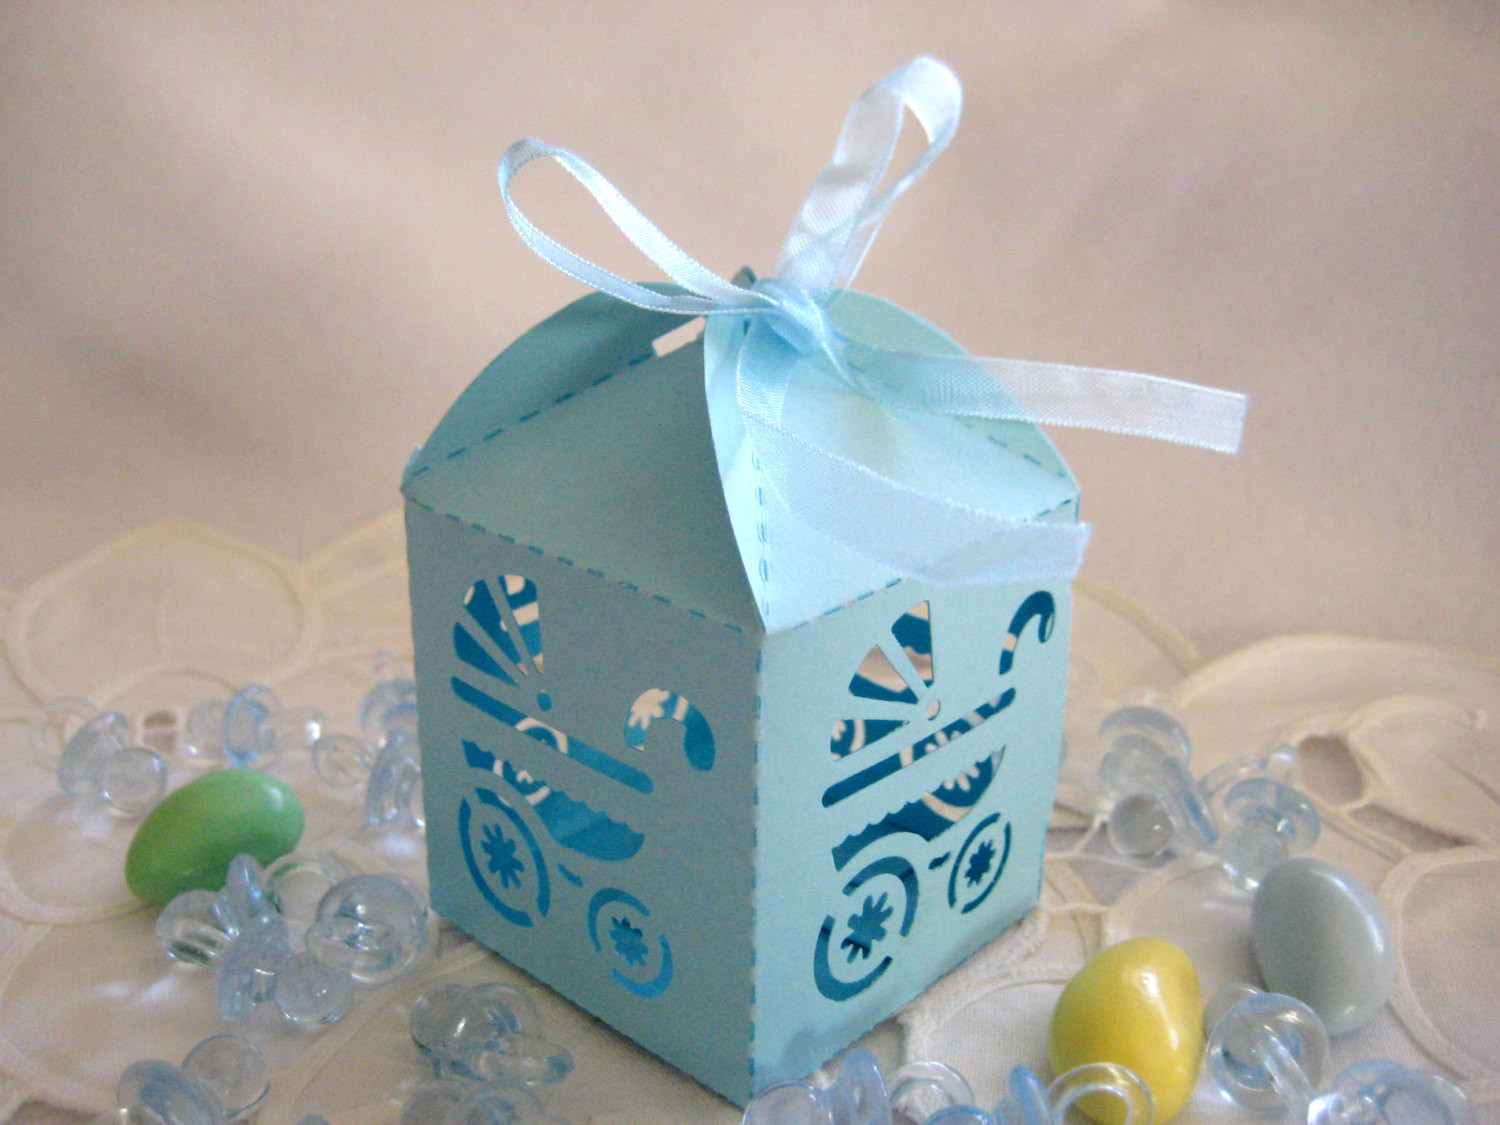 Party Favors For Baby Shower Boy
 Blue Baby Boy Carriage Party Favor Boxes for Baby Boy Baby